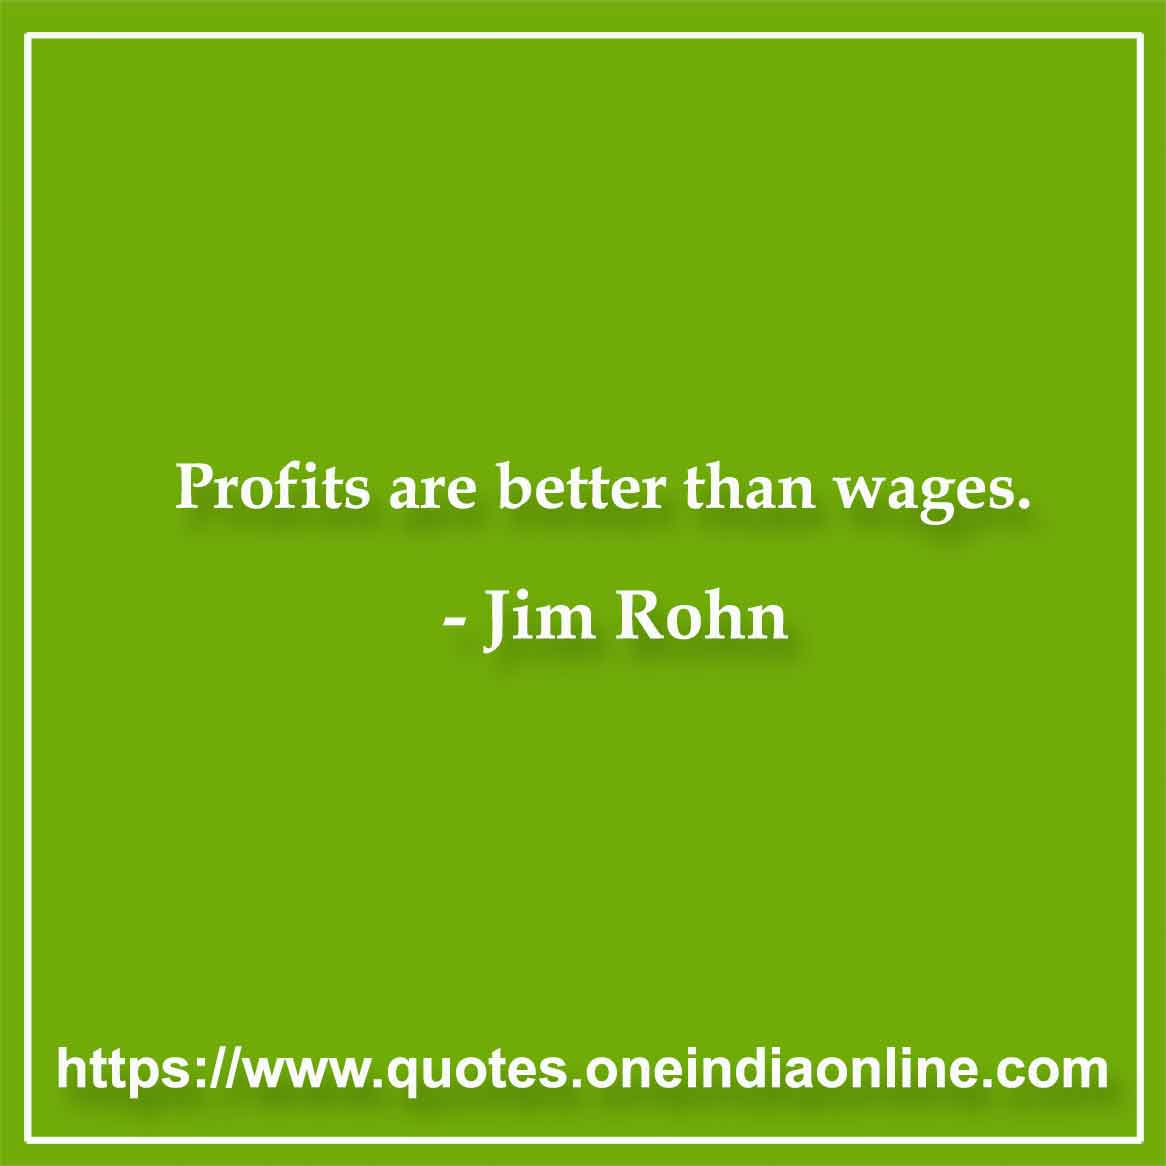 Profits are better than wages.

- Jim Rohn